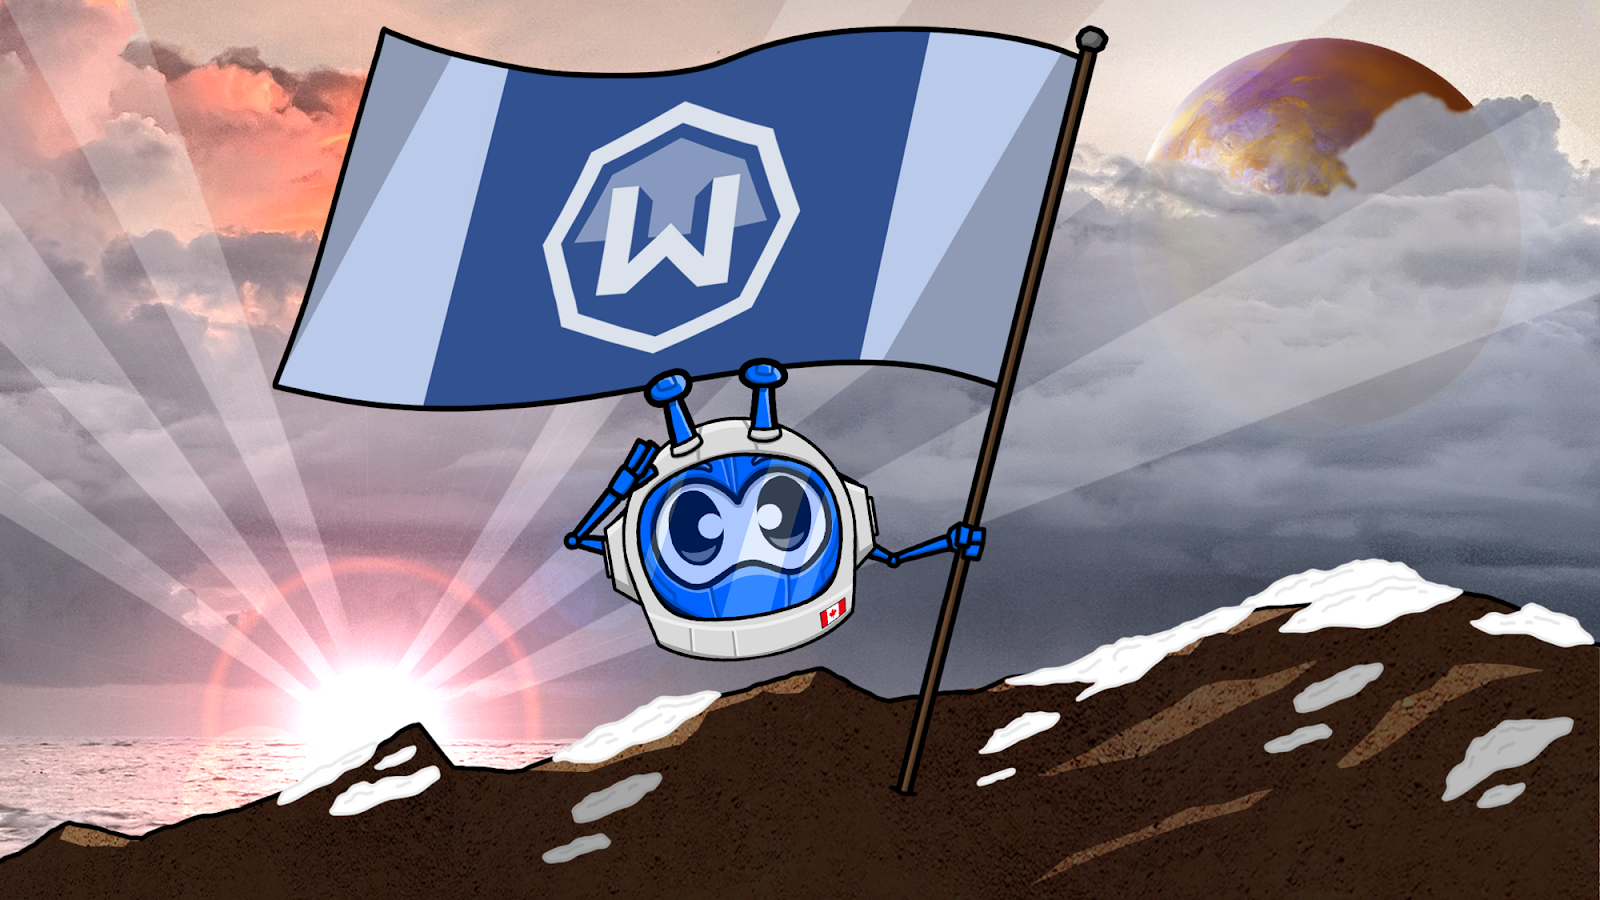 Garry in an EVA suit planting a Windscribe flag on a mountain in a distant planet